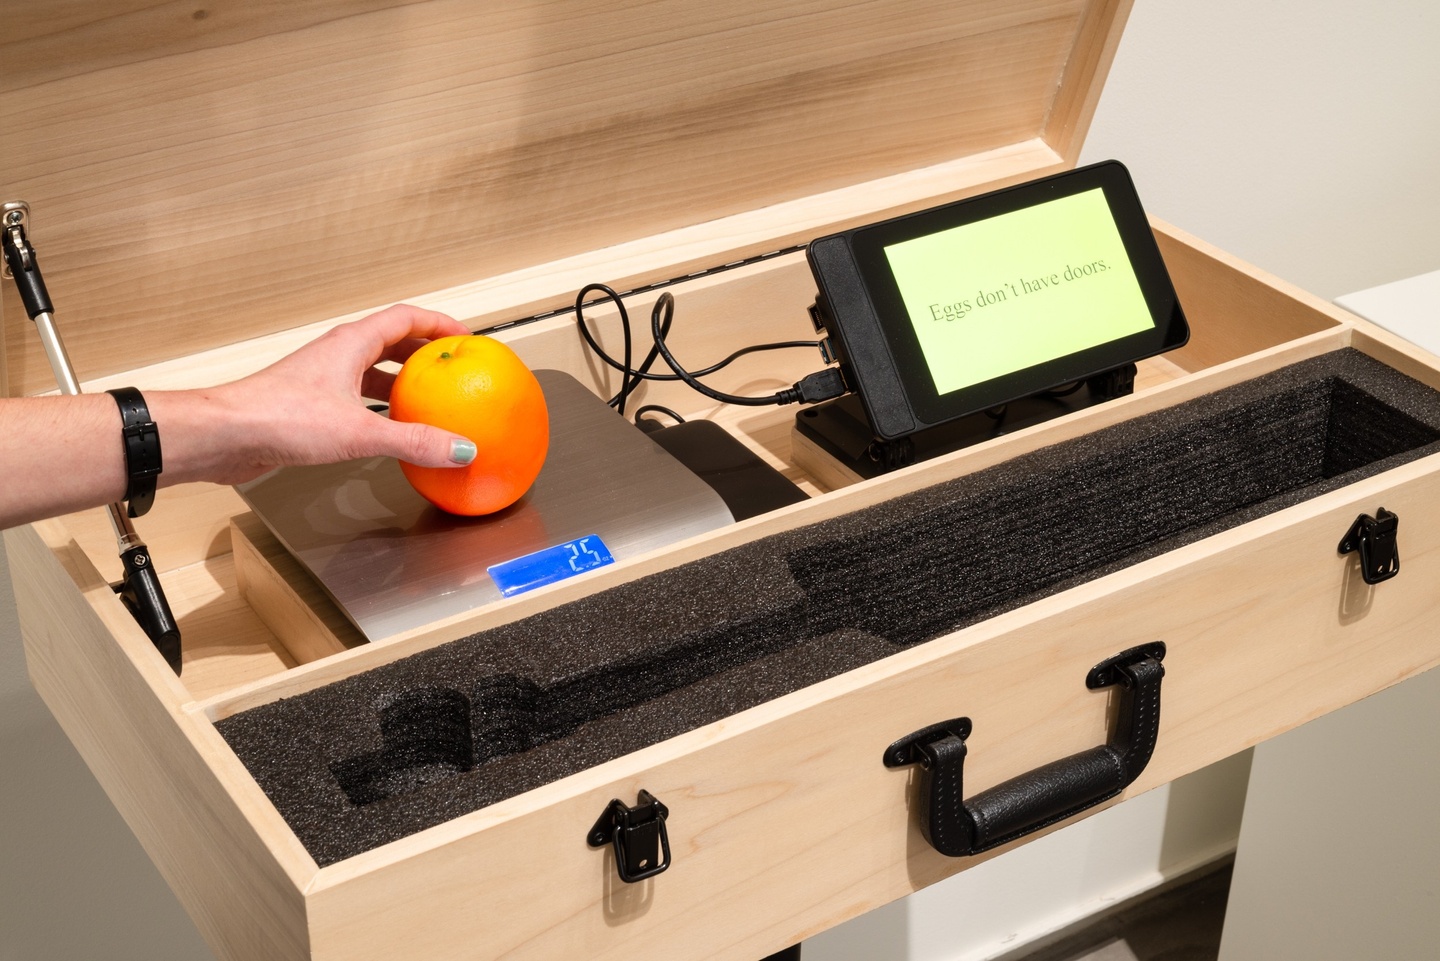 A wooden suitcase with a disembodied hand weighing an orange. On the right a small screen with the words "Eggs don't have doors"